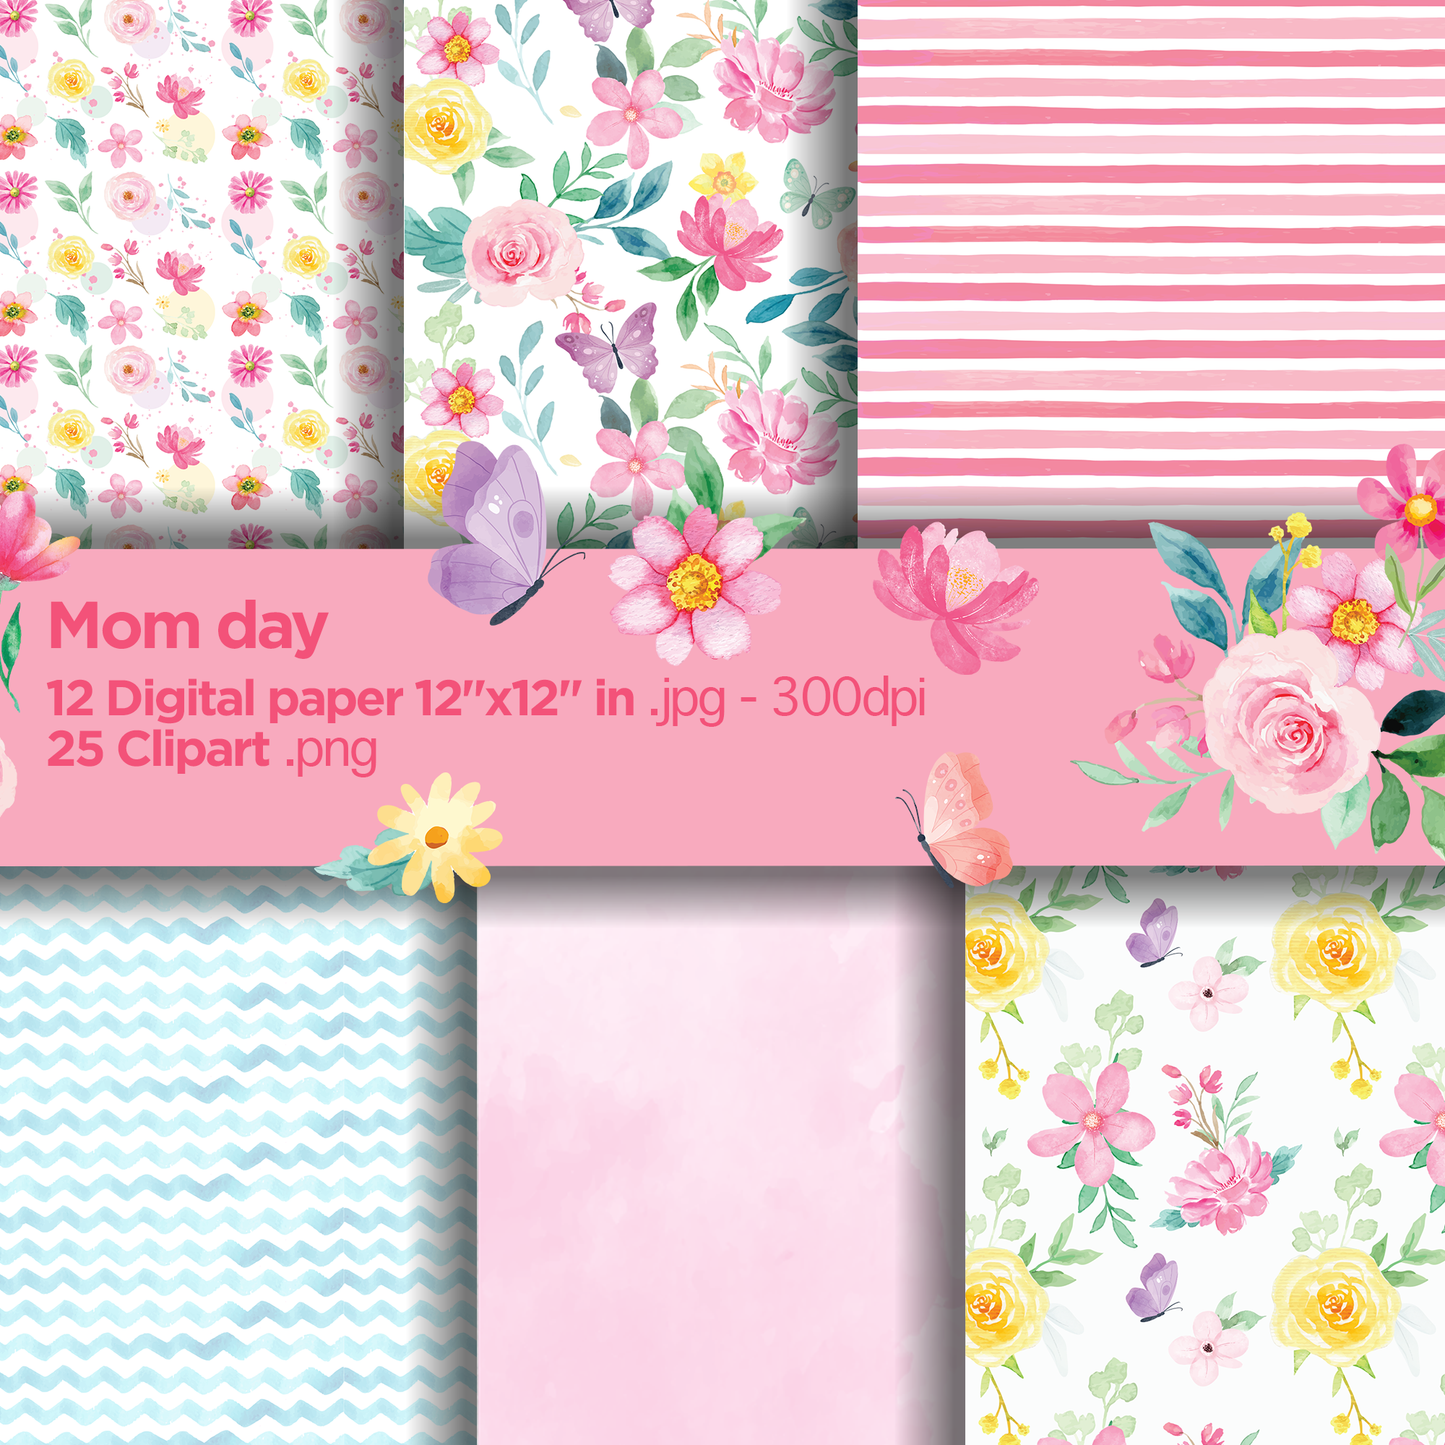 Mom day Digital Papers, Mom day Backgrounds, Mom day Papers, Scrapbook, Printable digital paper, tropical, playa Mom day